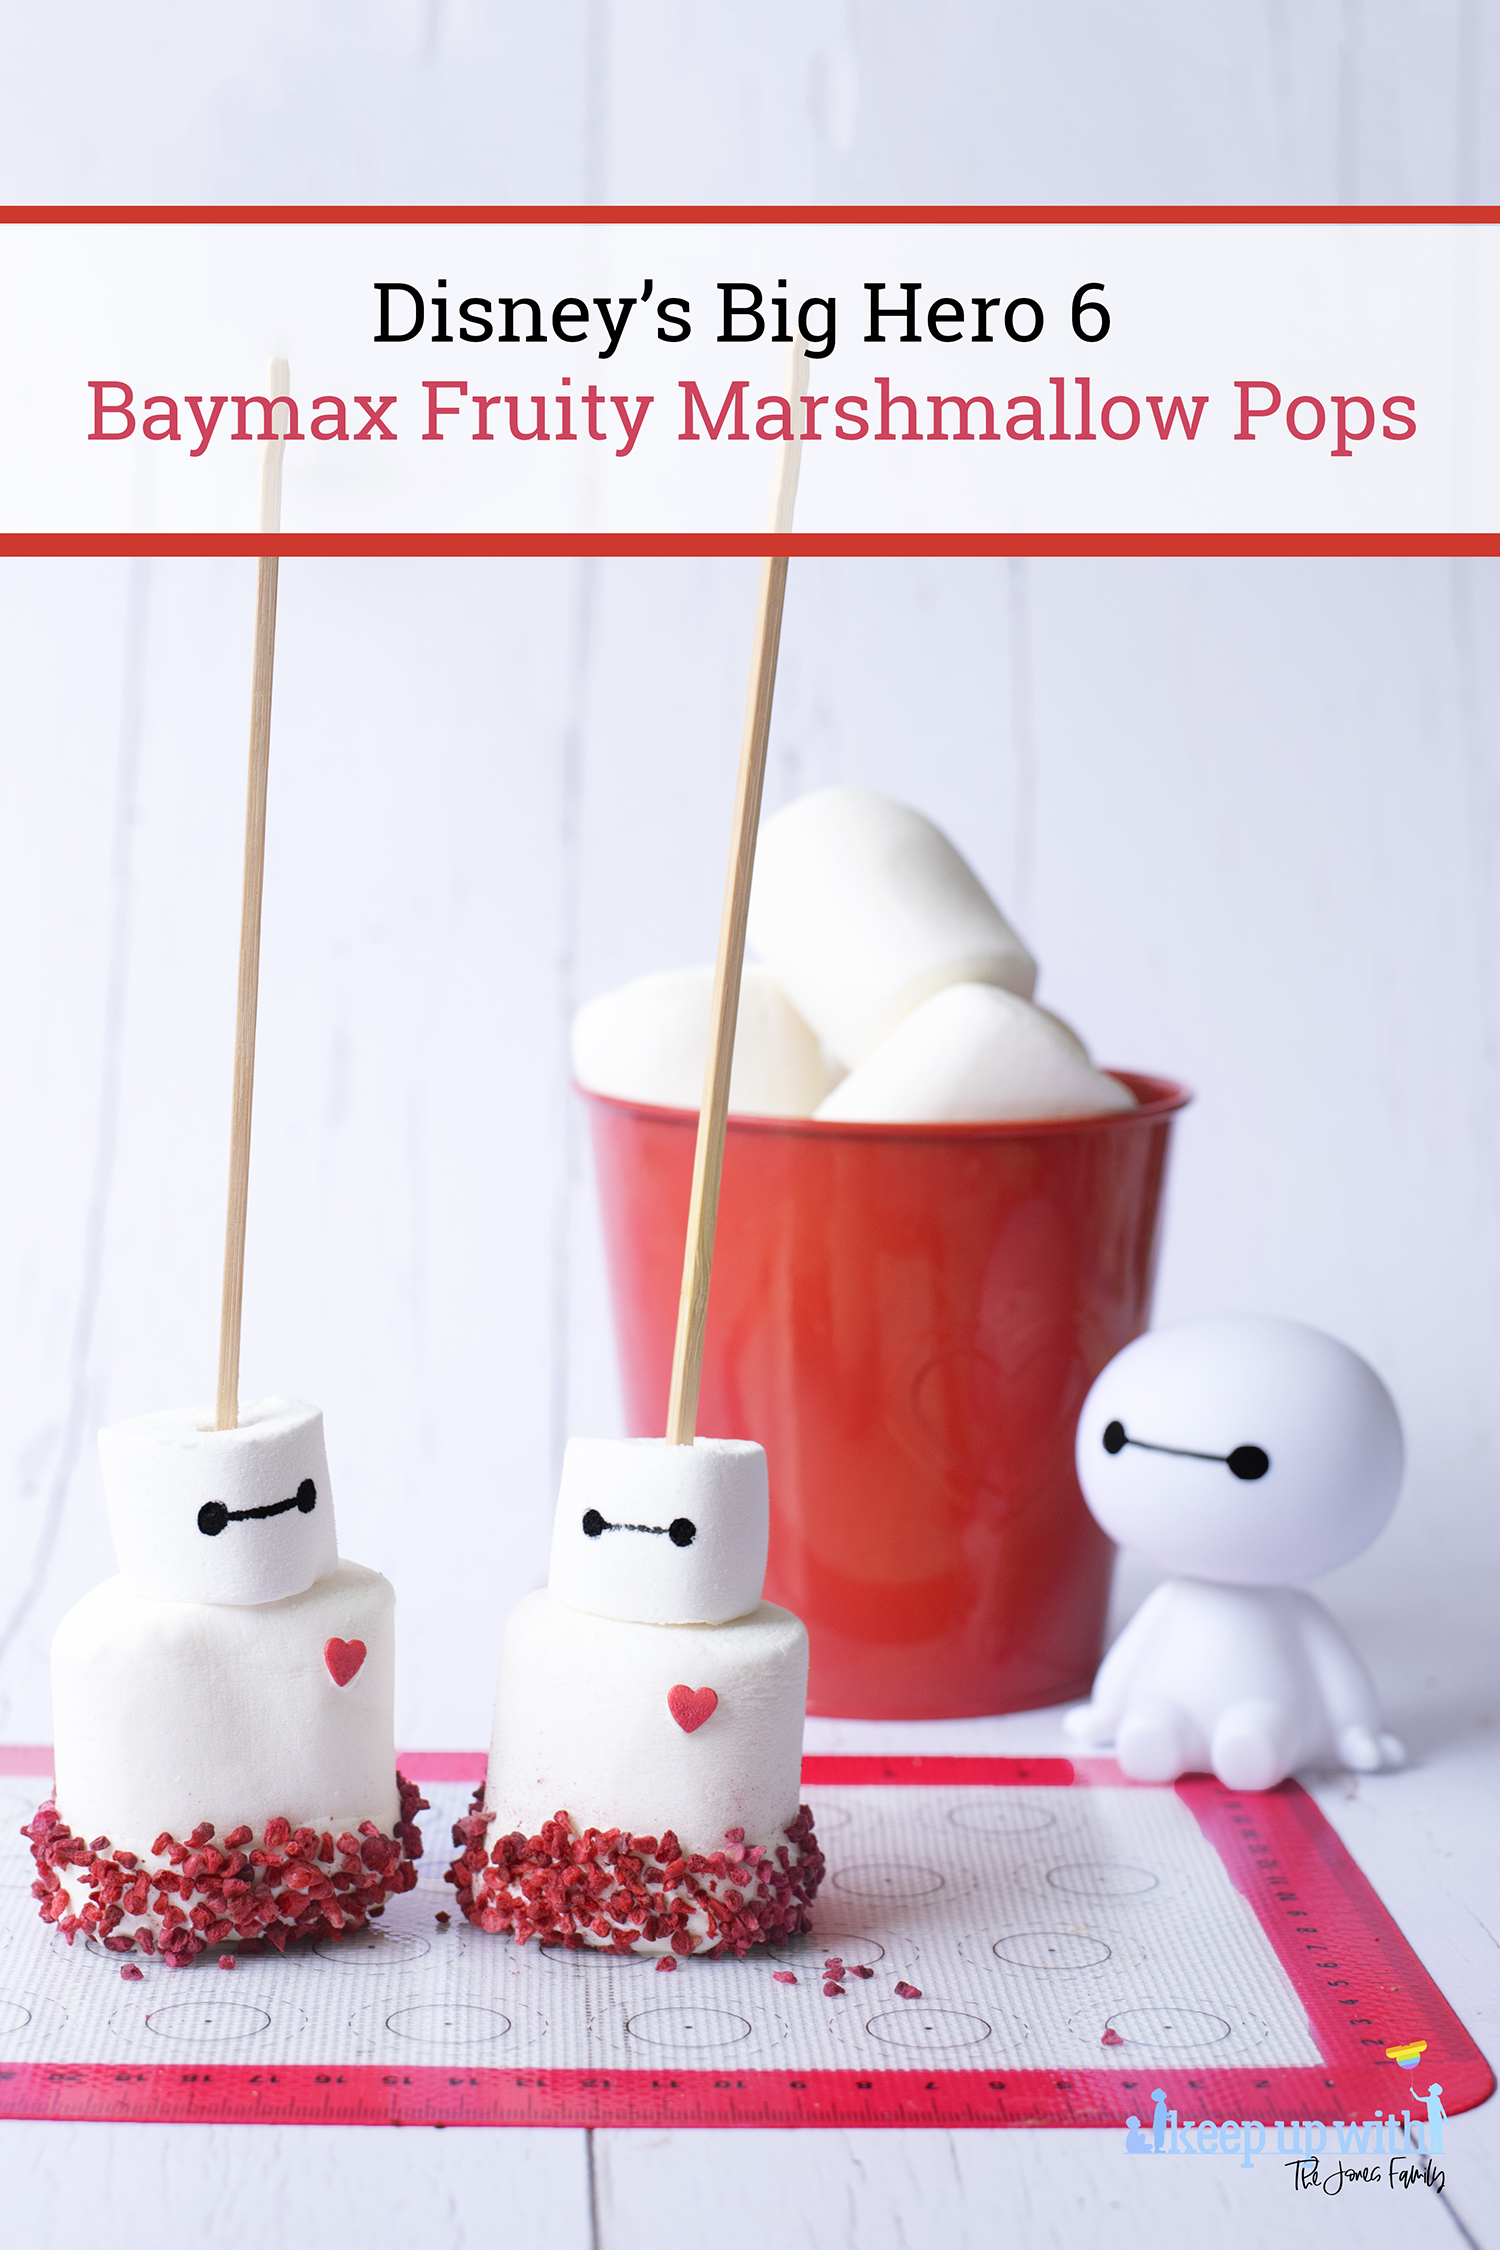 Big Hero 6 Red Baymax Tan Background Edible Cake Topper Image ABPID218 – A  Birthday Place